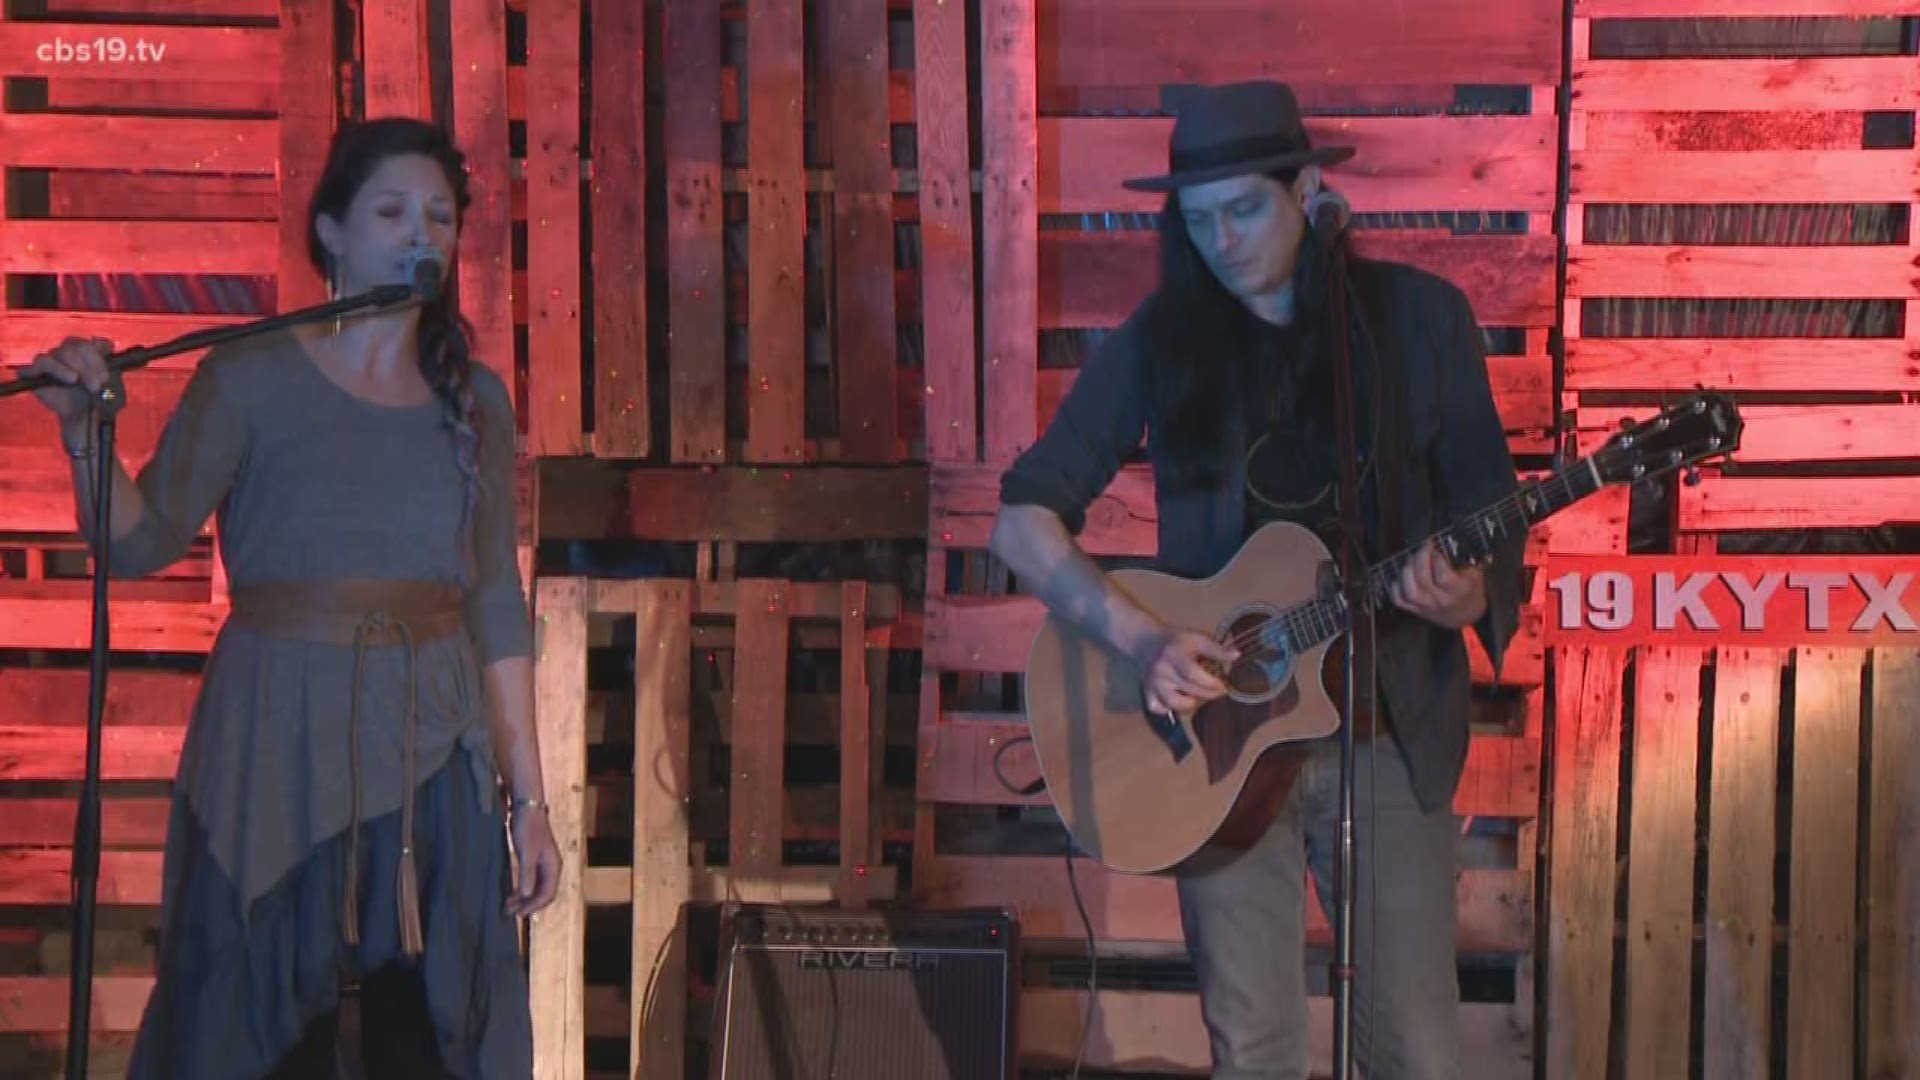 Watch this harmonious duo share their talents on the CBS 19 stage!